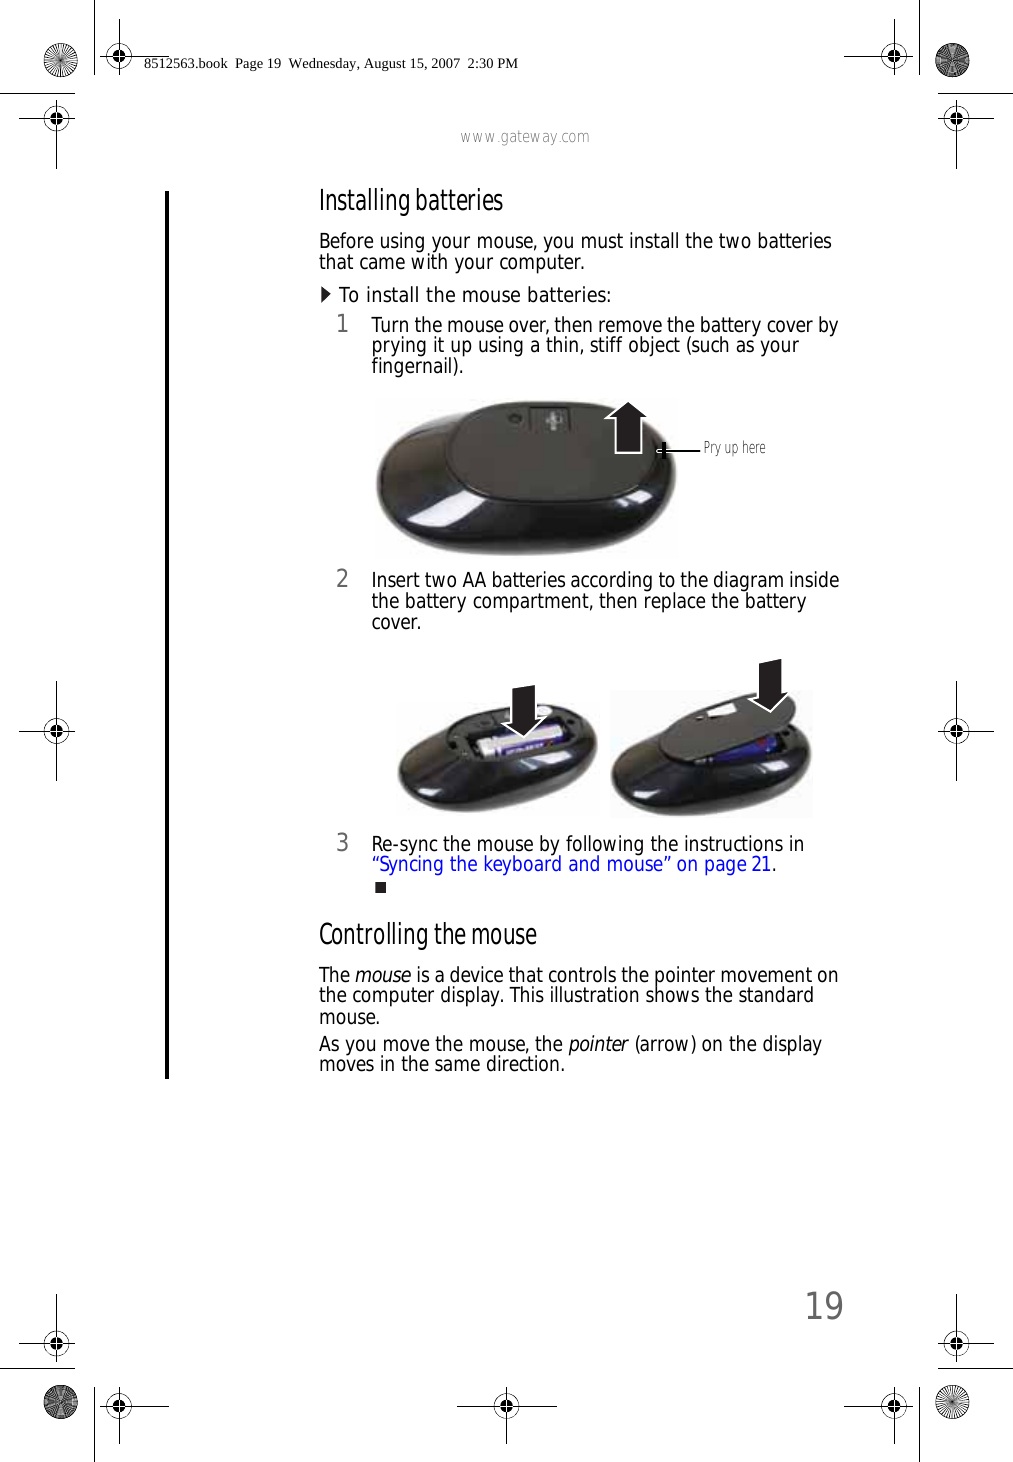 www.gateway.com19Installing batteriesBefore using your mouse, you must install the two batteries that came with your computer.To install the mouse batteries:  1Turn the mouse over, then remove the battery cover by prying it up using a thin, stiff object (such as your fingernail).2Insert two AA batteries according to the diagram inside the battery compartment, then replace the battery cover.3Re-sync the mouse by following the instructions in “Syncing the keyboard and mouse” on page 21.Controlling the mouseThe mouse is a device that controls the pointer movement on the computer display. This illustration shows the standard mouse.As you move the mouse, the pointer (arrow) on the display moves in the same direction.Pry up here8512563.book  Page 19  Wednesday, August 15, 2007  2:30 PM